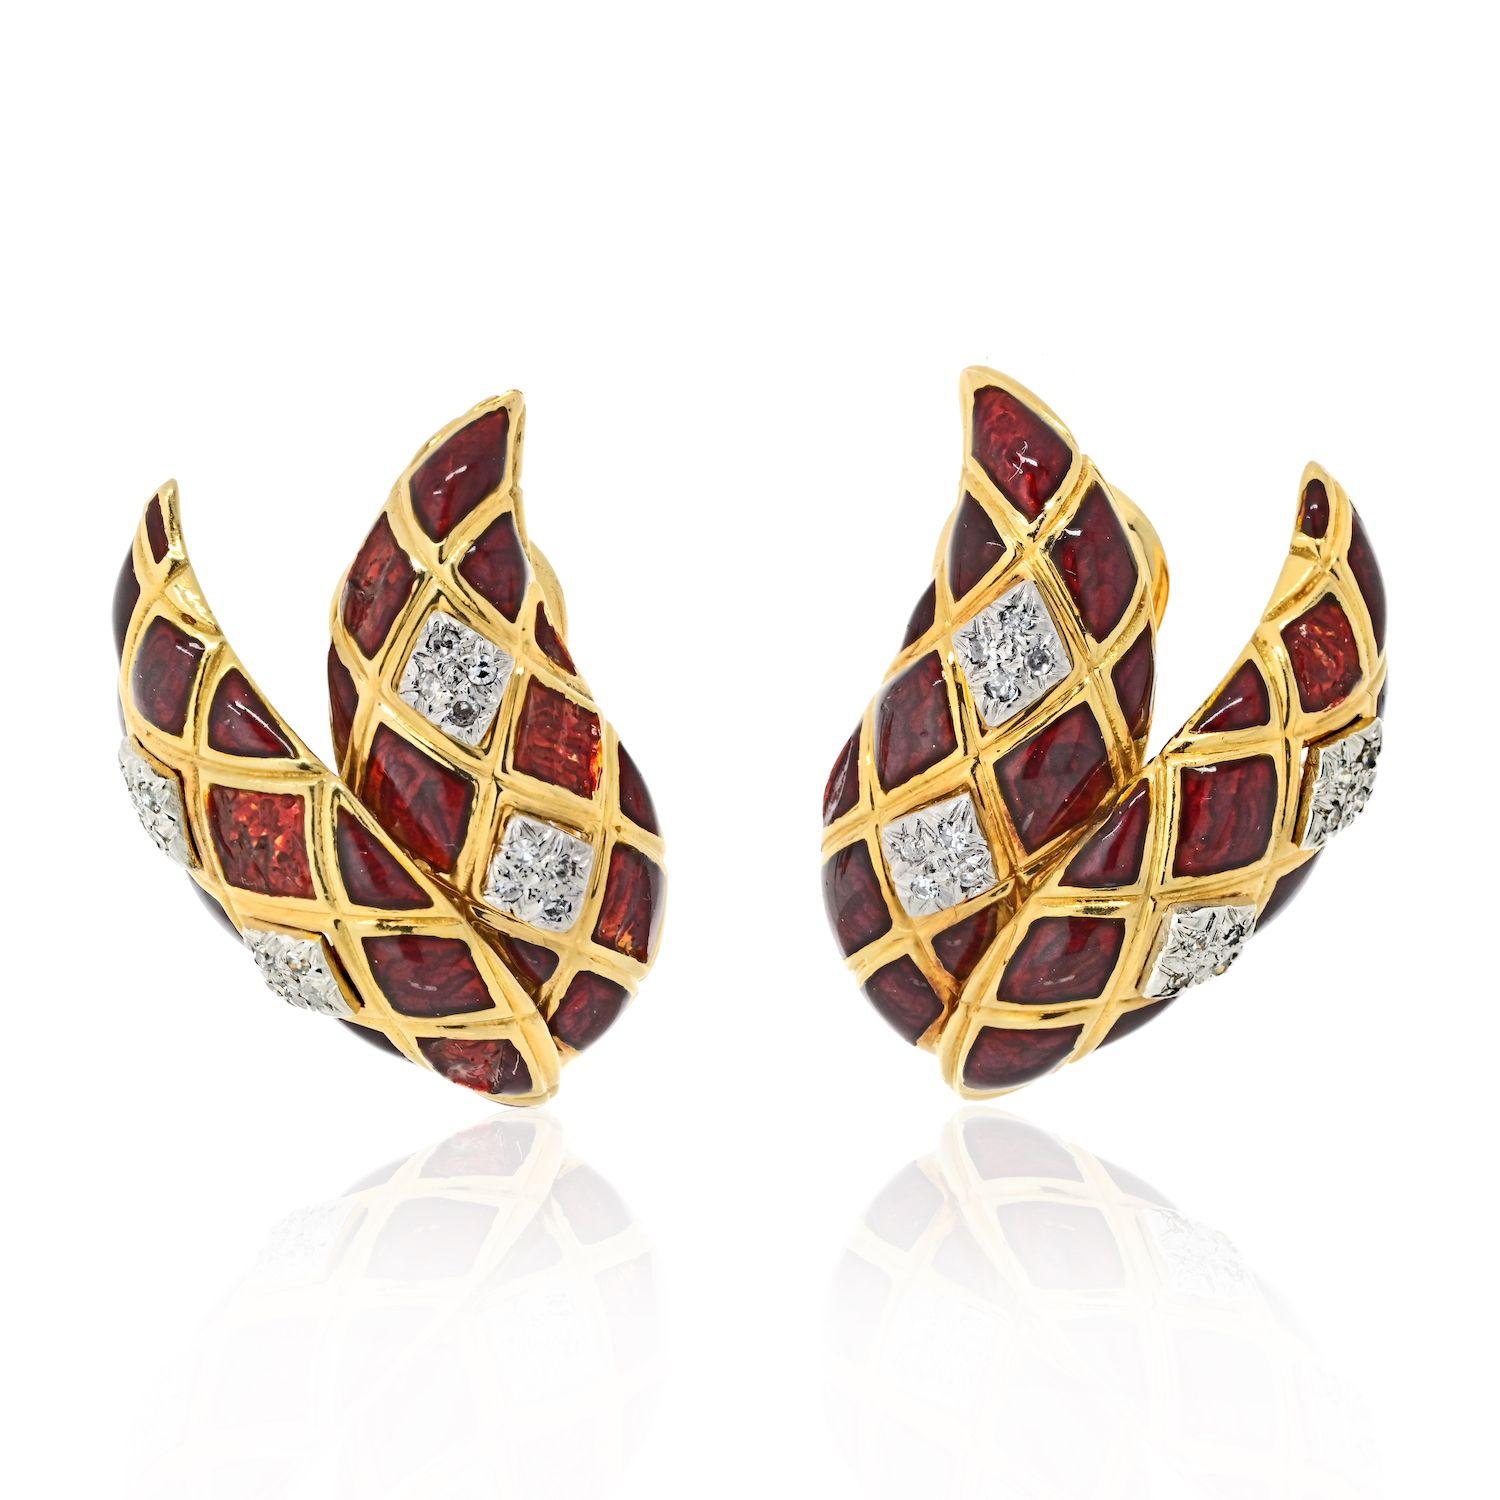 David Webb was a renowned American jewelry designer known for his bold and artistic creations. One of his iconic pieces is the 18k gold clip back earrings fashioned in a double leaf motif style with red enameling and a checkerboard pattern. The